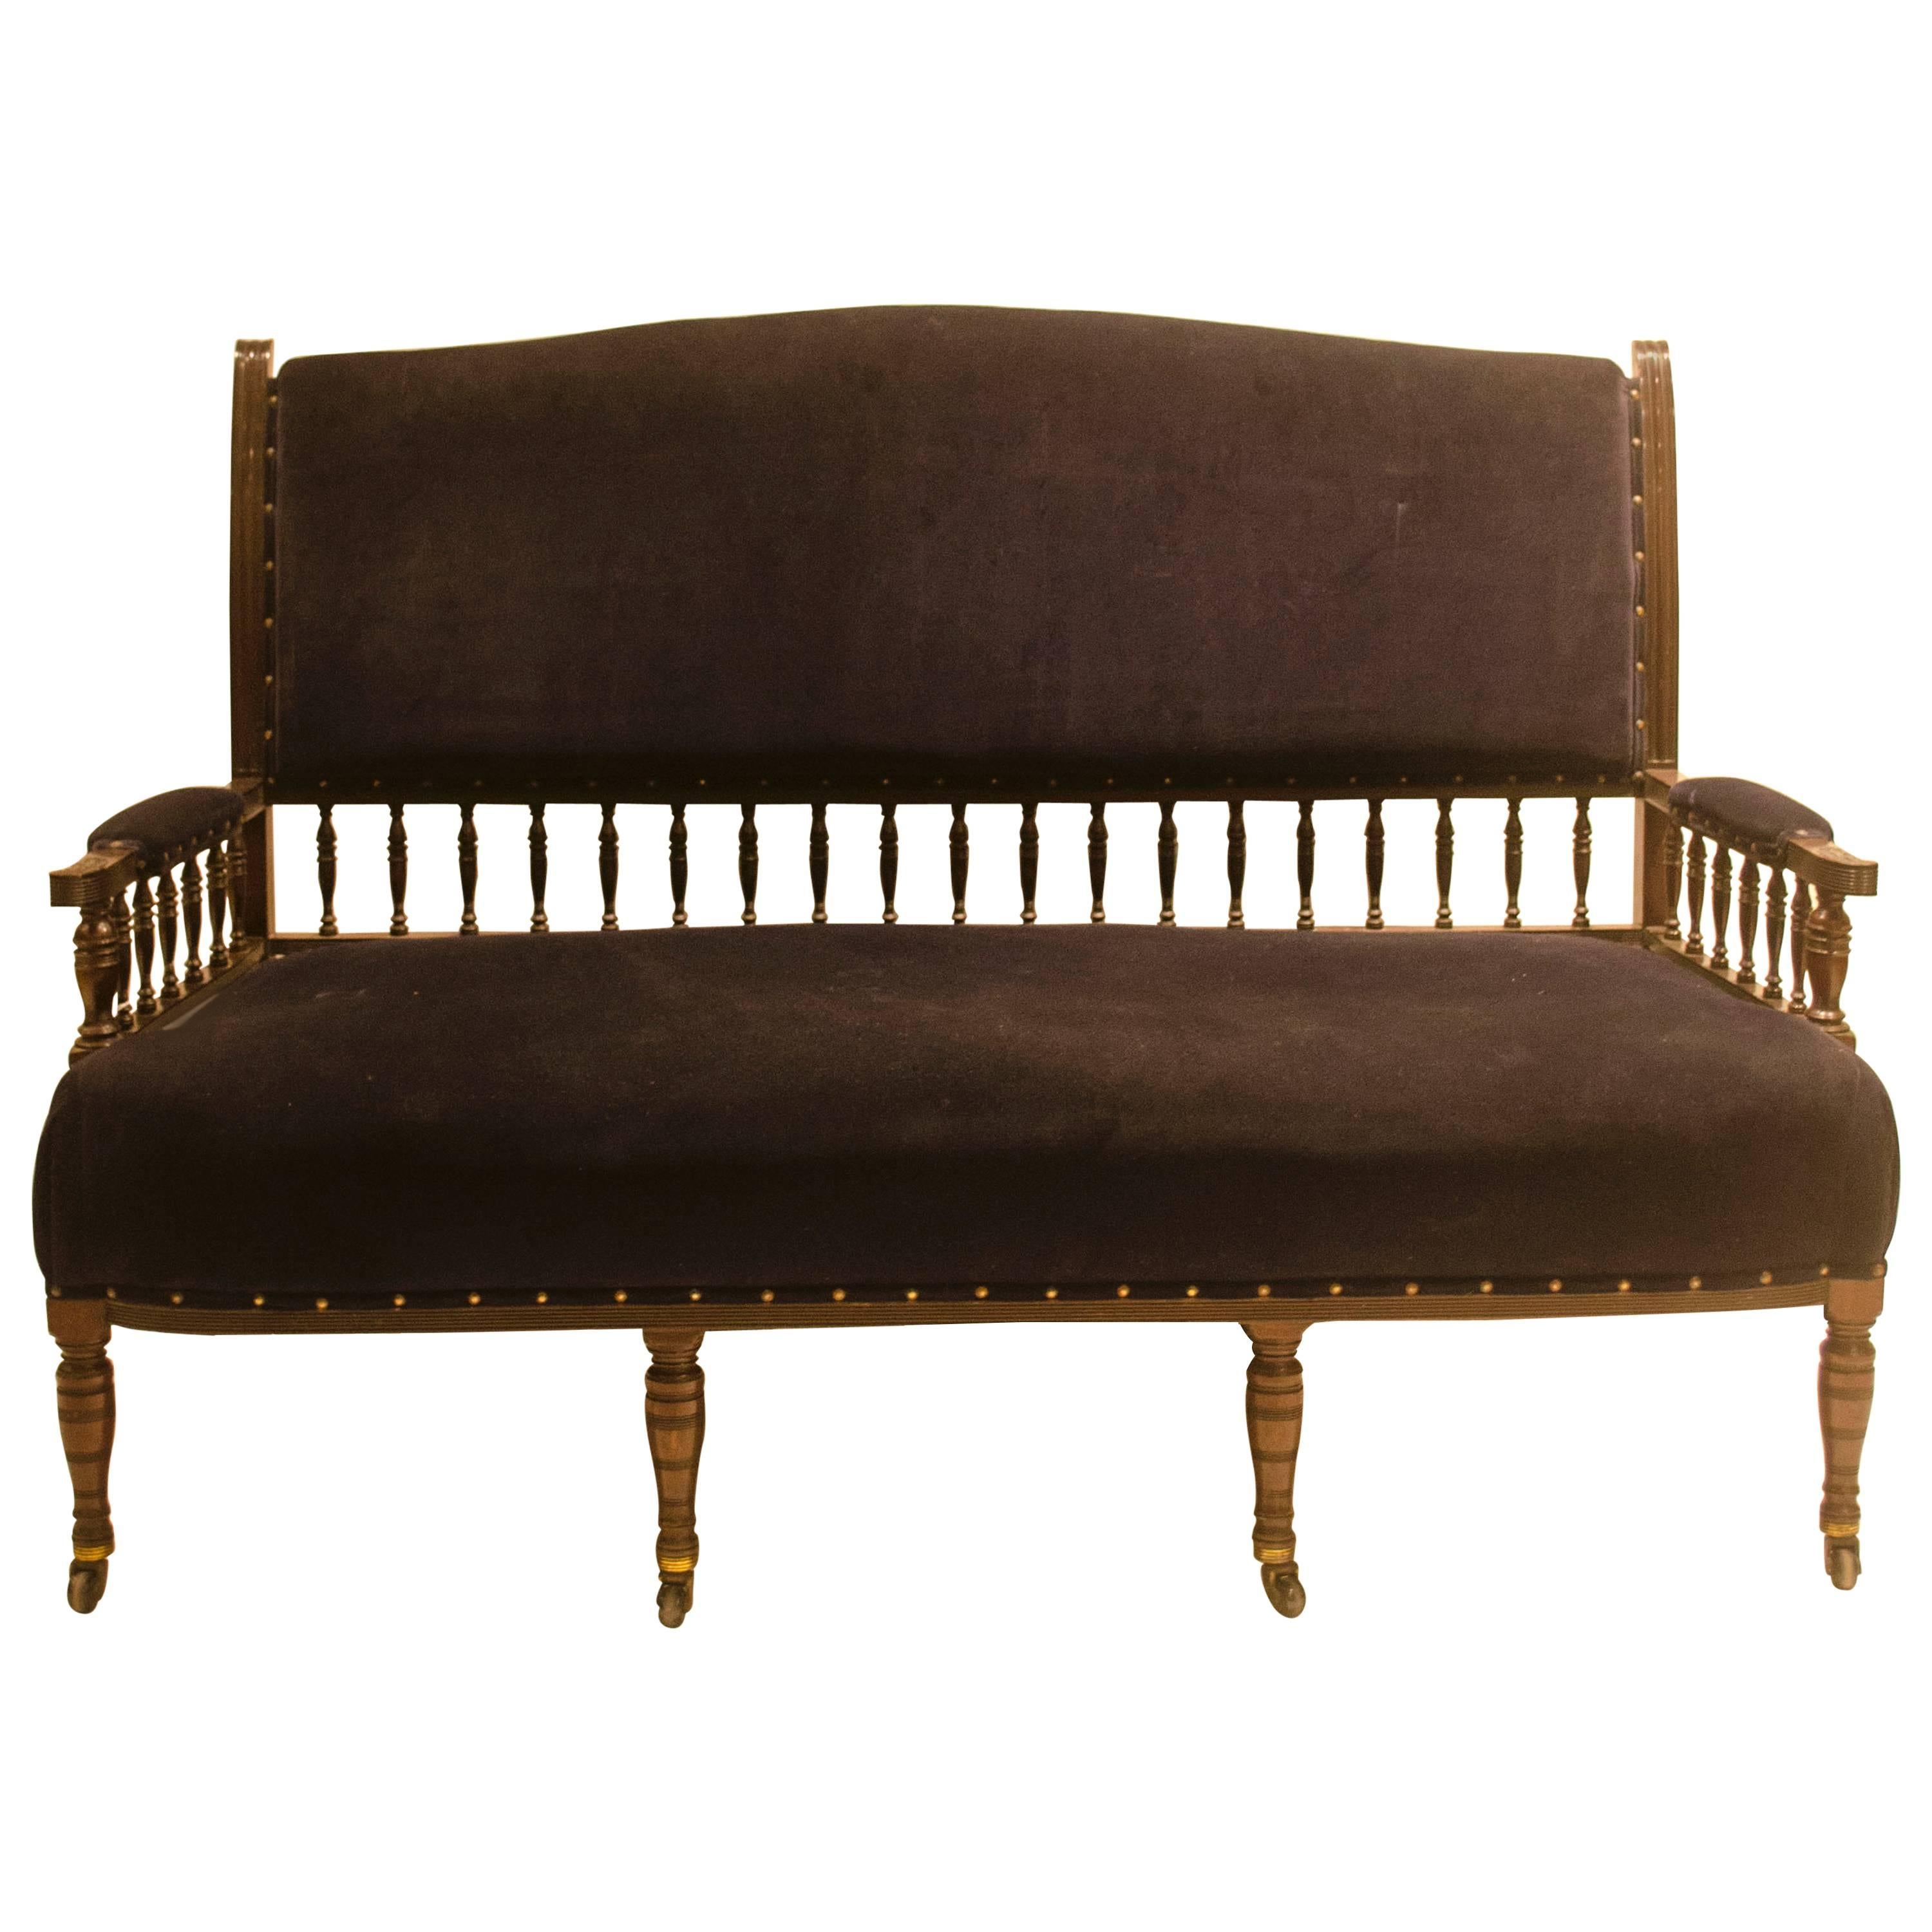 Collinson & Lock. An Anglo-Japanese Mahogany Settee with carved & scrolled arms For Sale